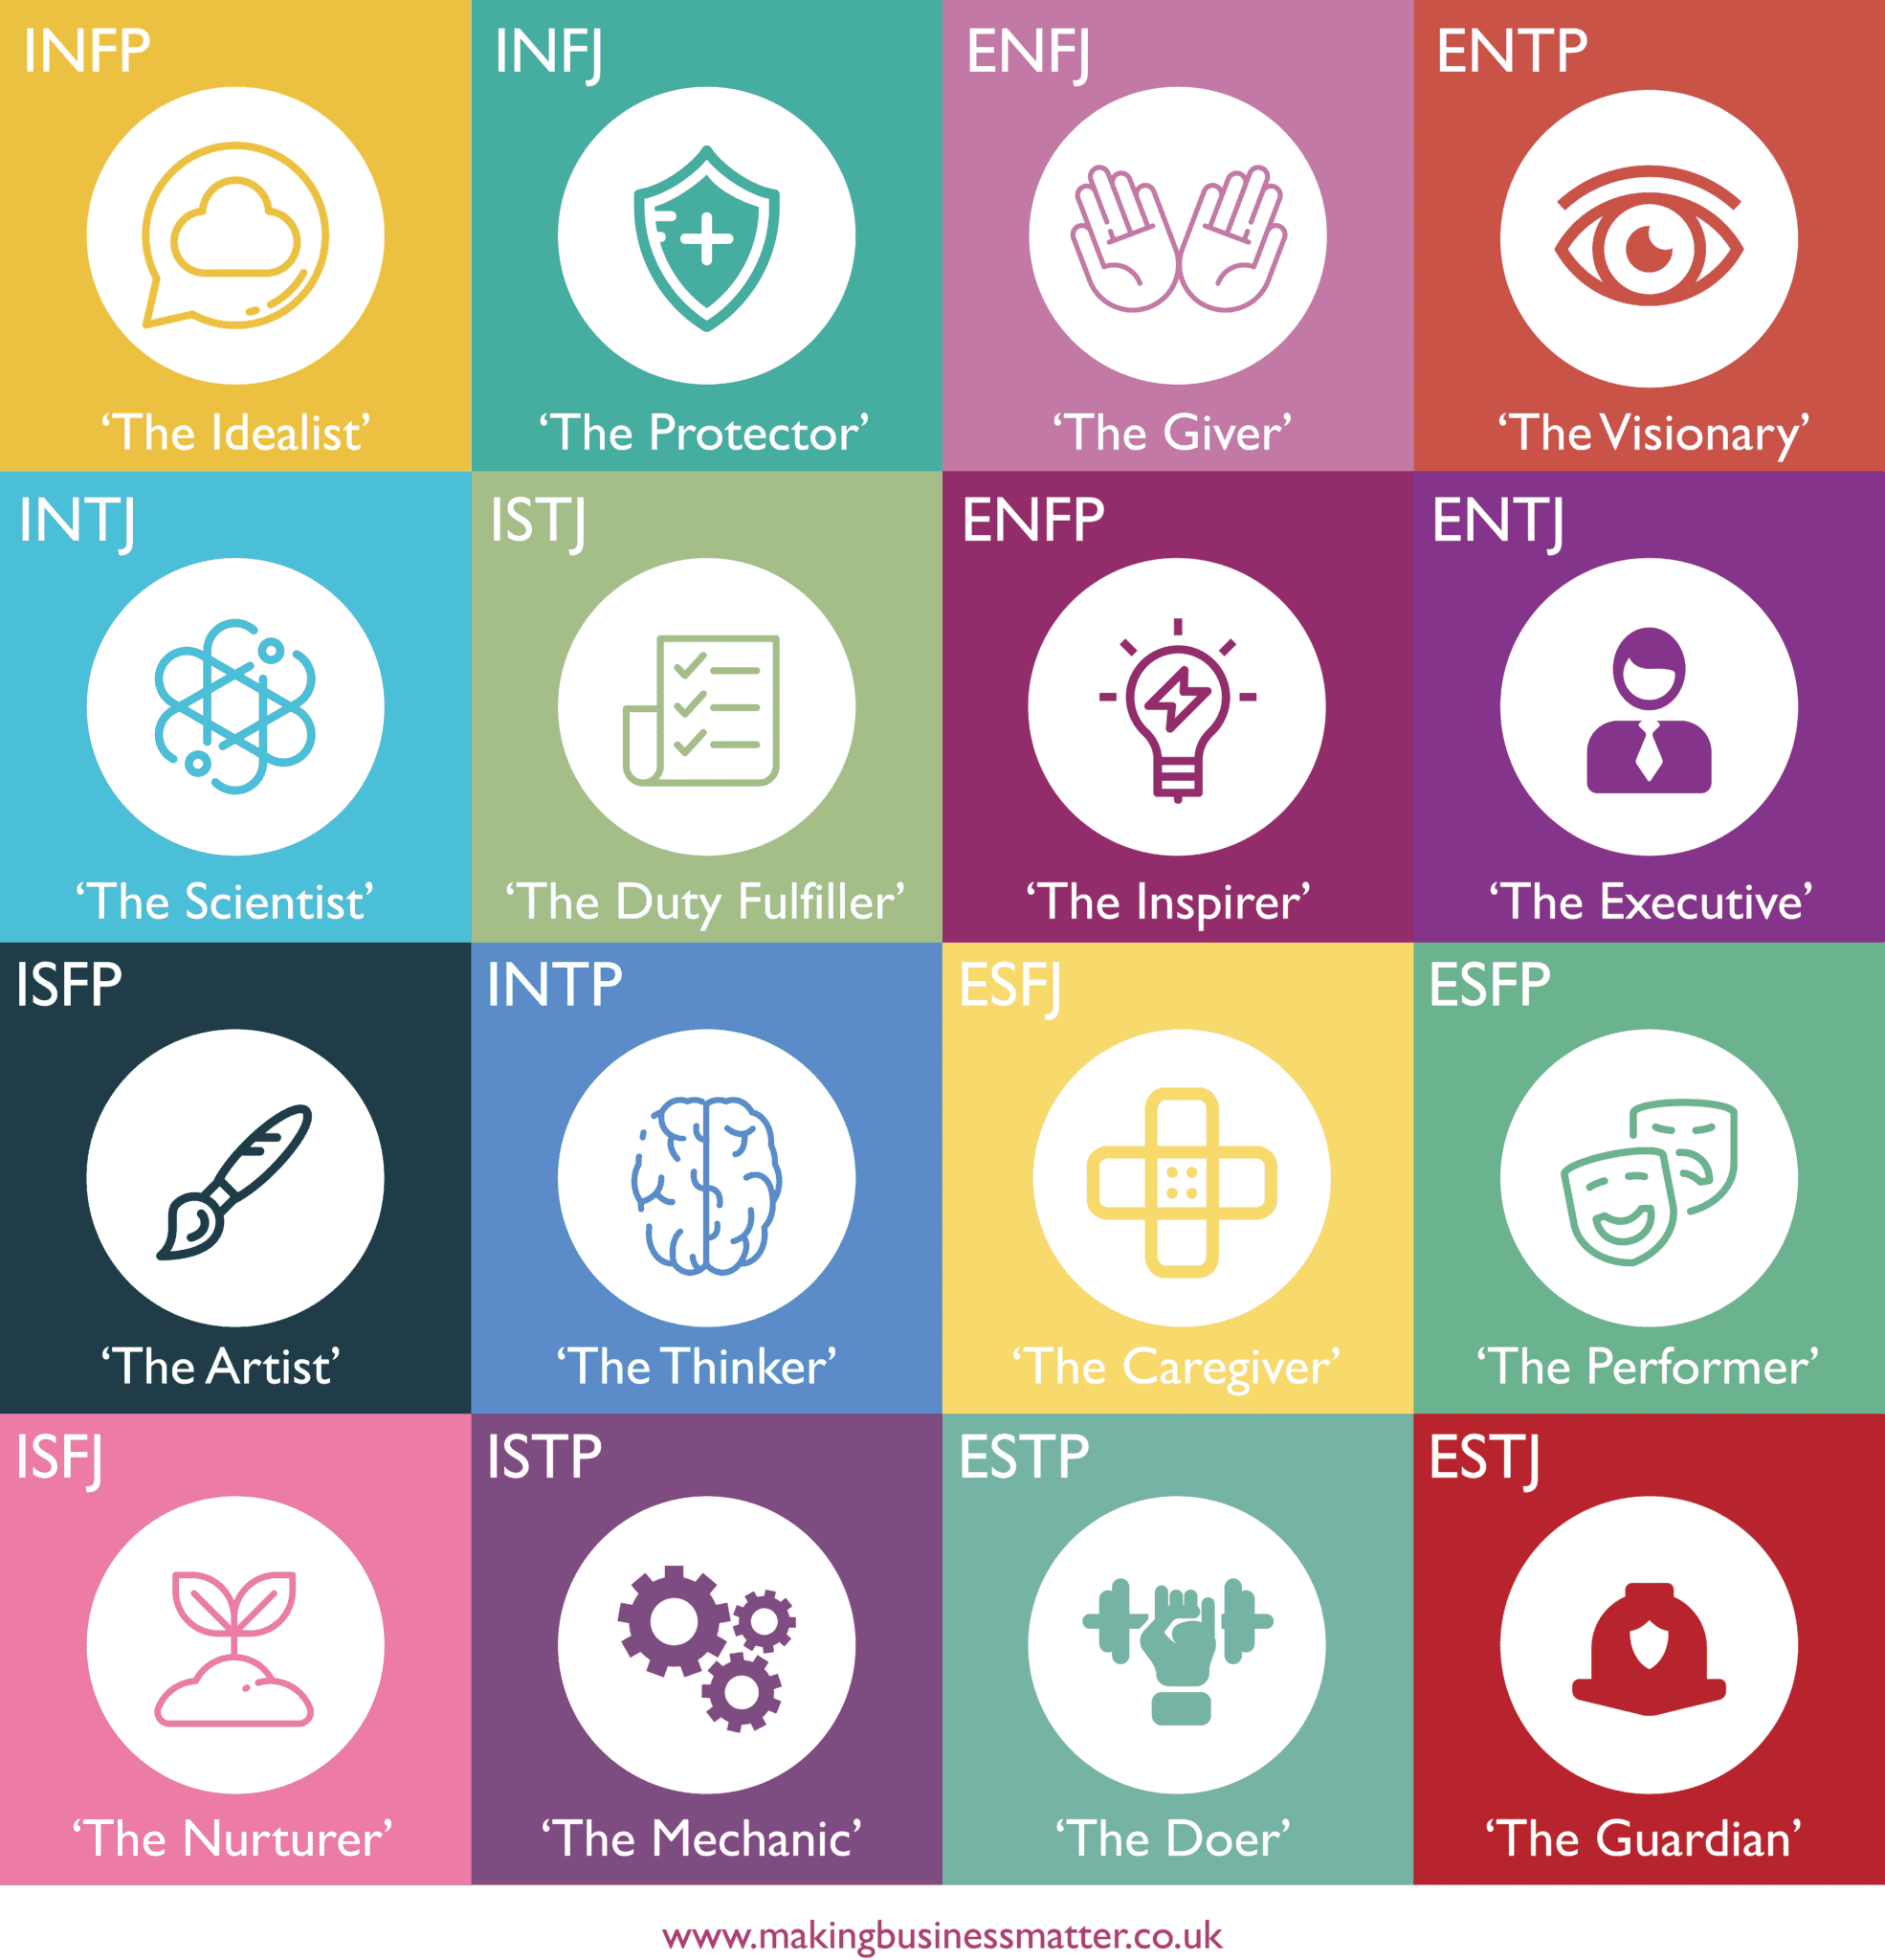 16 Personality Types by Myers & Briggs